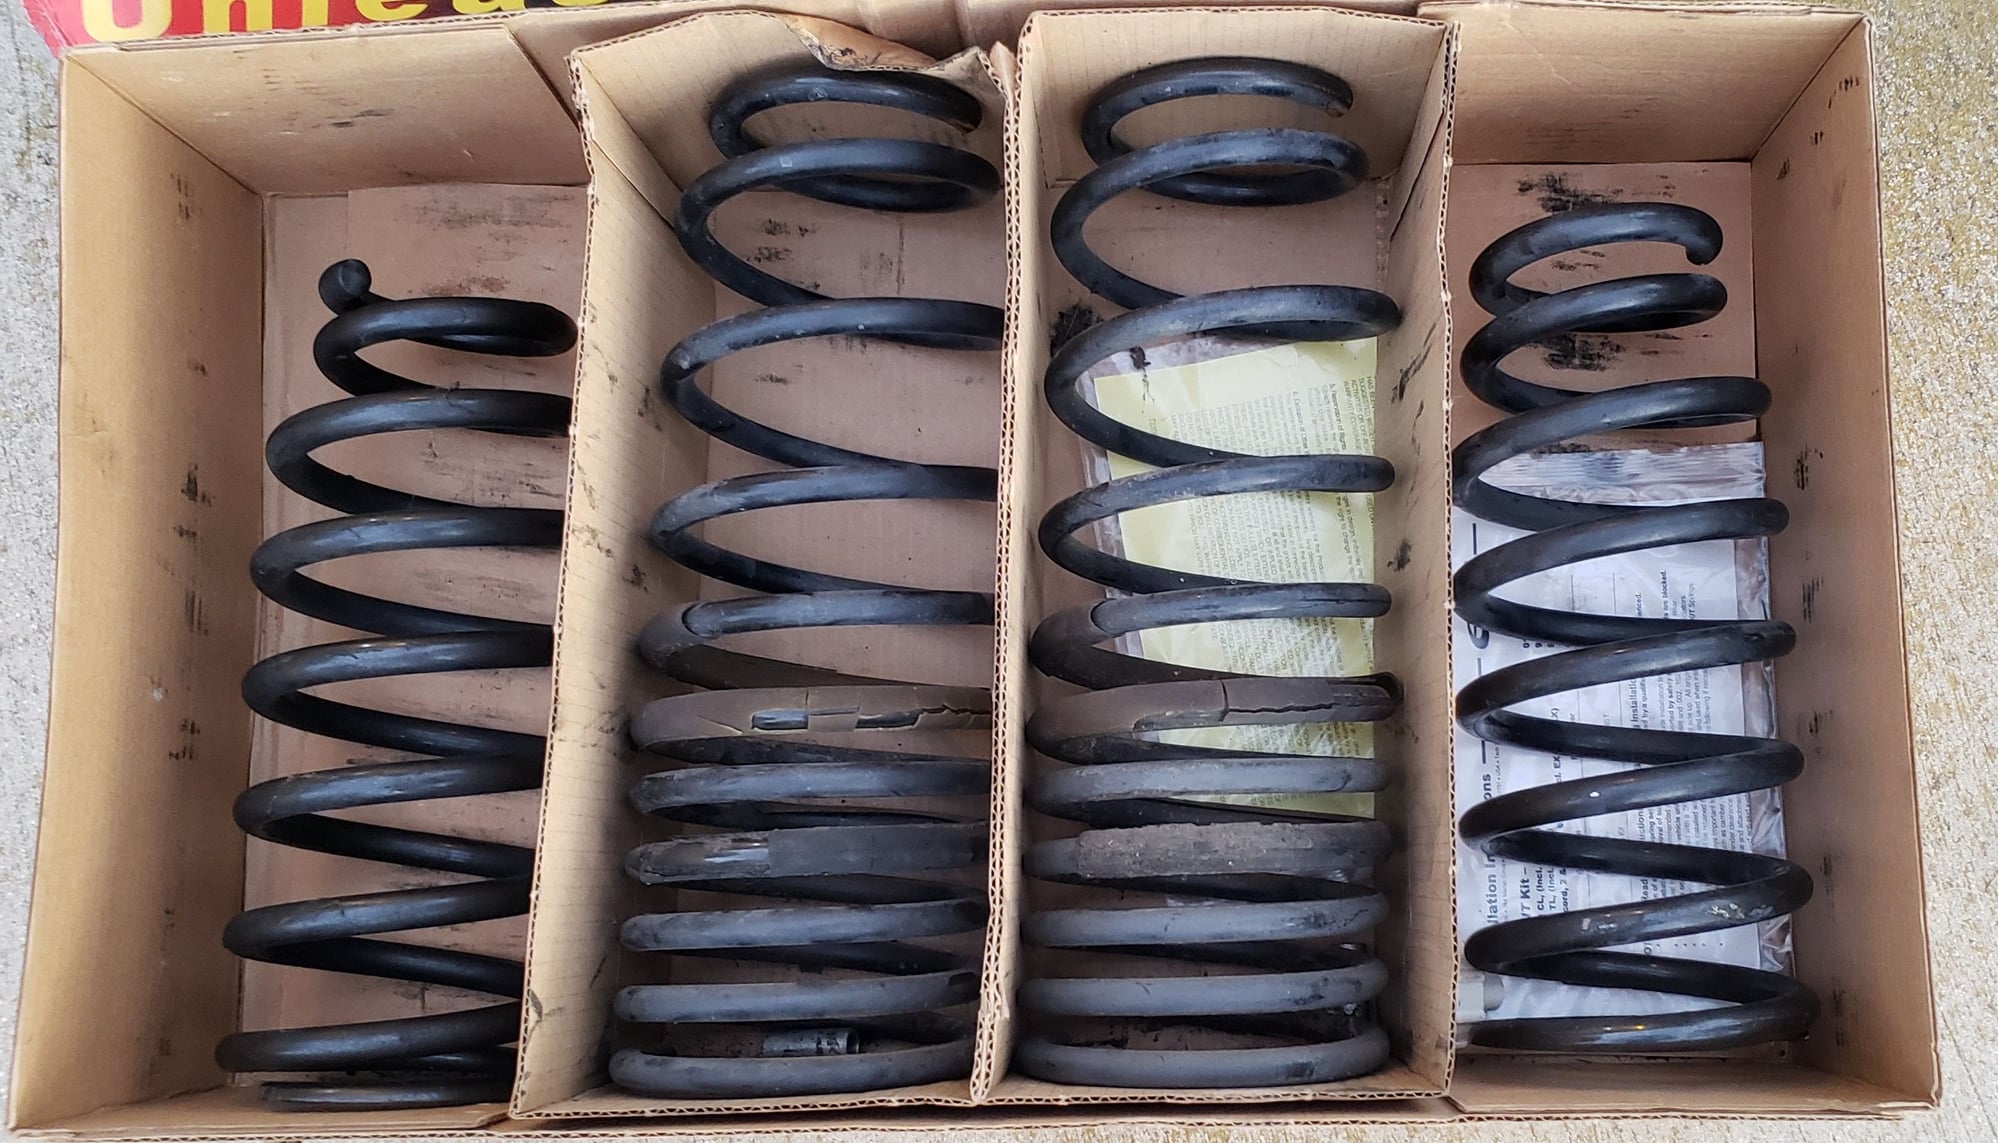 Steering/Suspension - FS: 2G TL Eibach Pro-Kit Lowering Springs - Used - 1999 to 2003 Acura TL - 1999 to 2003 Honda Accord - Tustin, CA 92780, United States